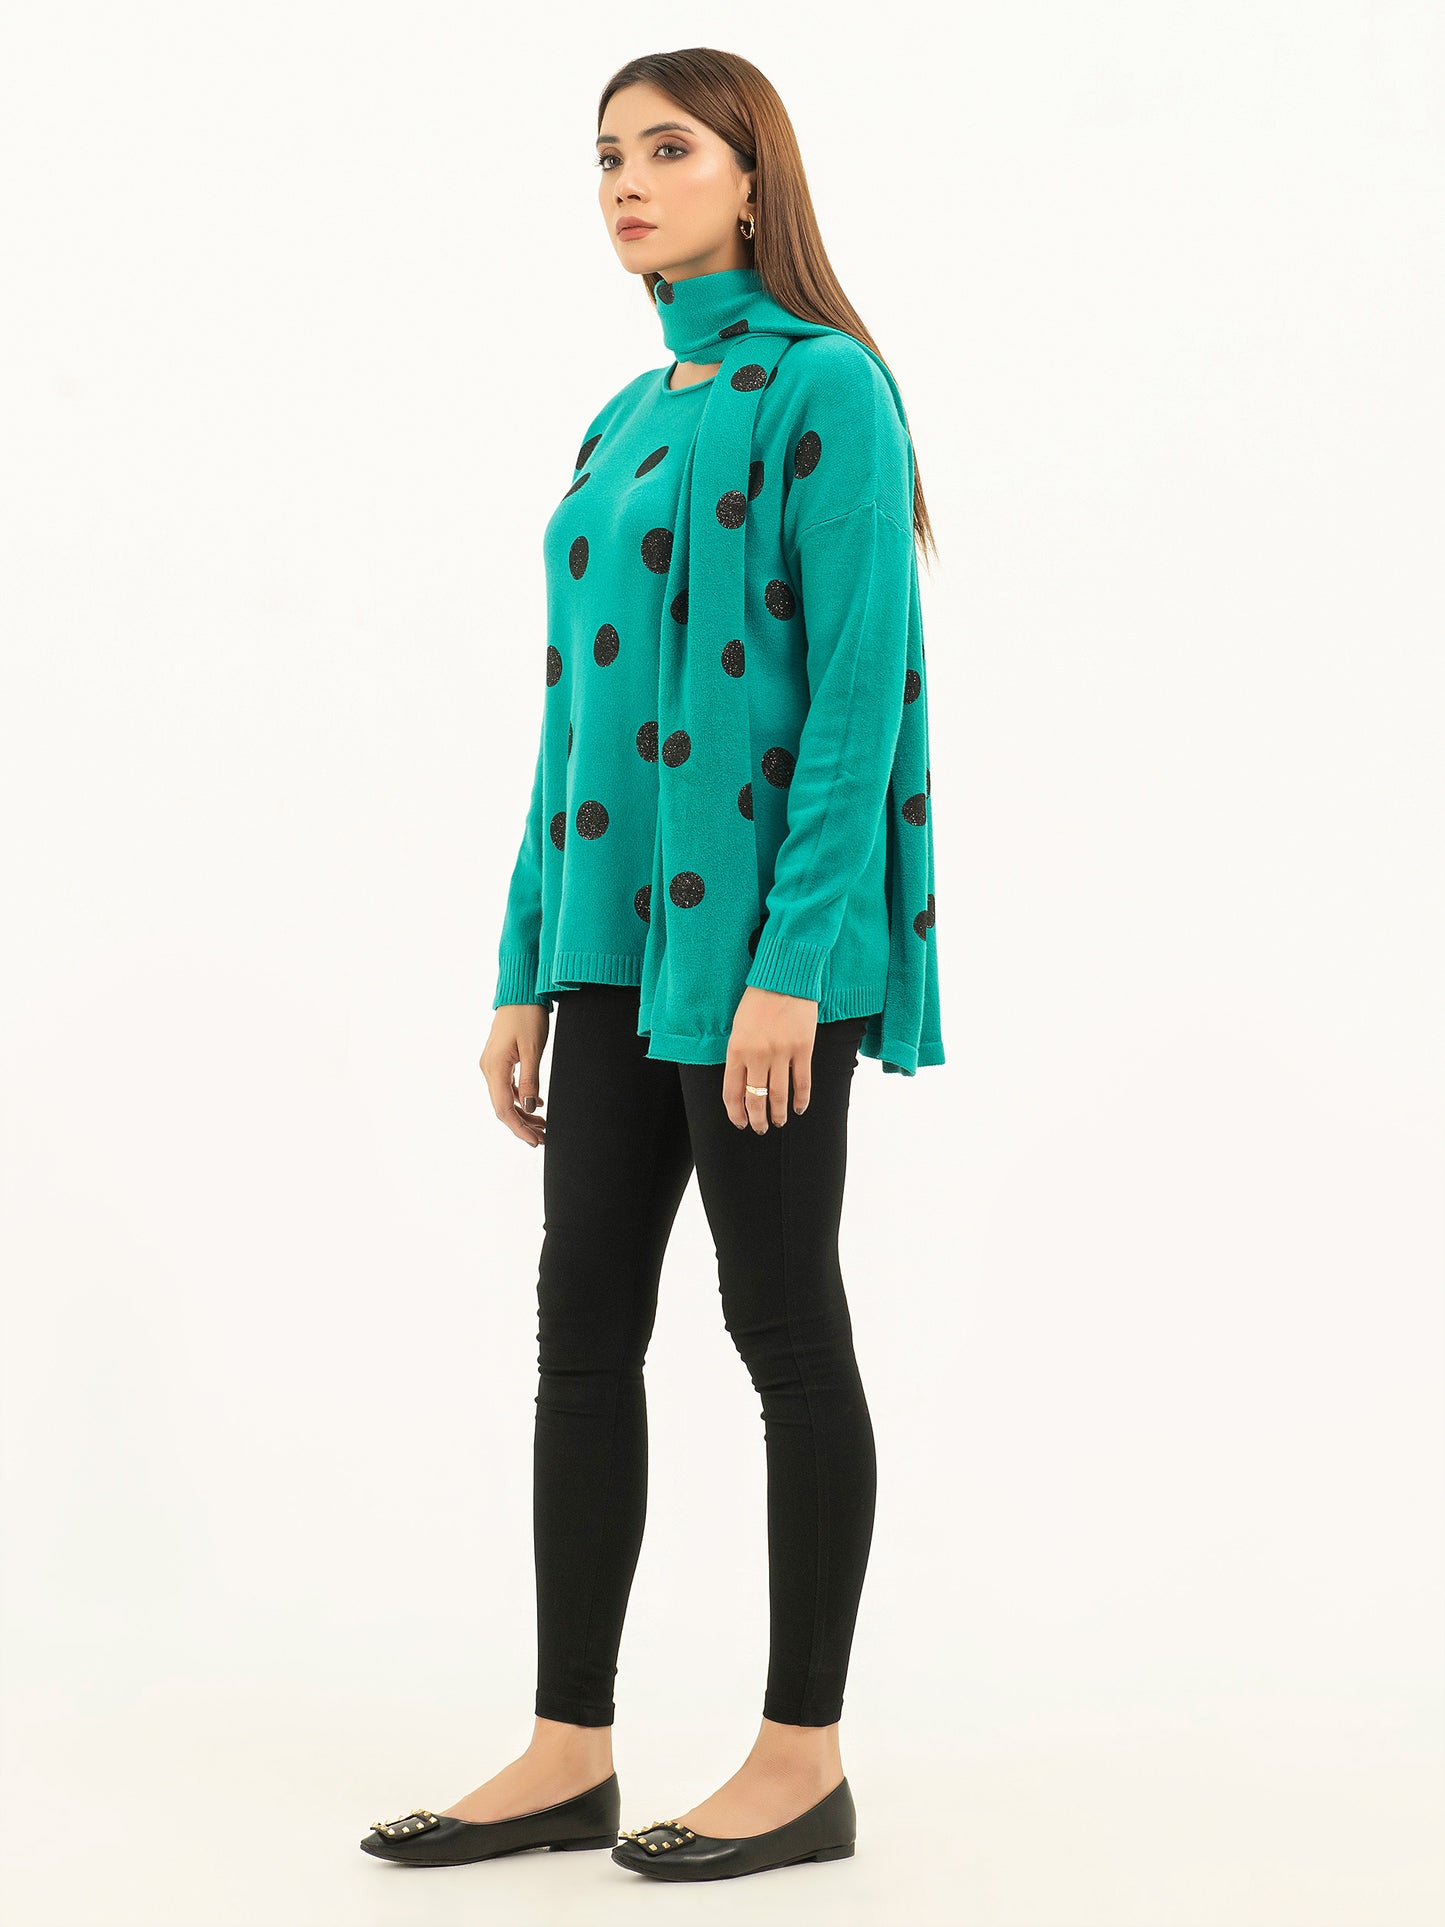 Polka Dot Sweater and Scarf